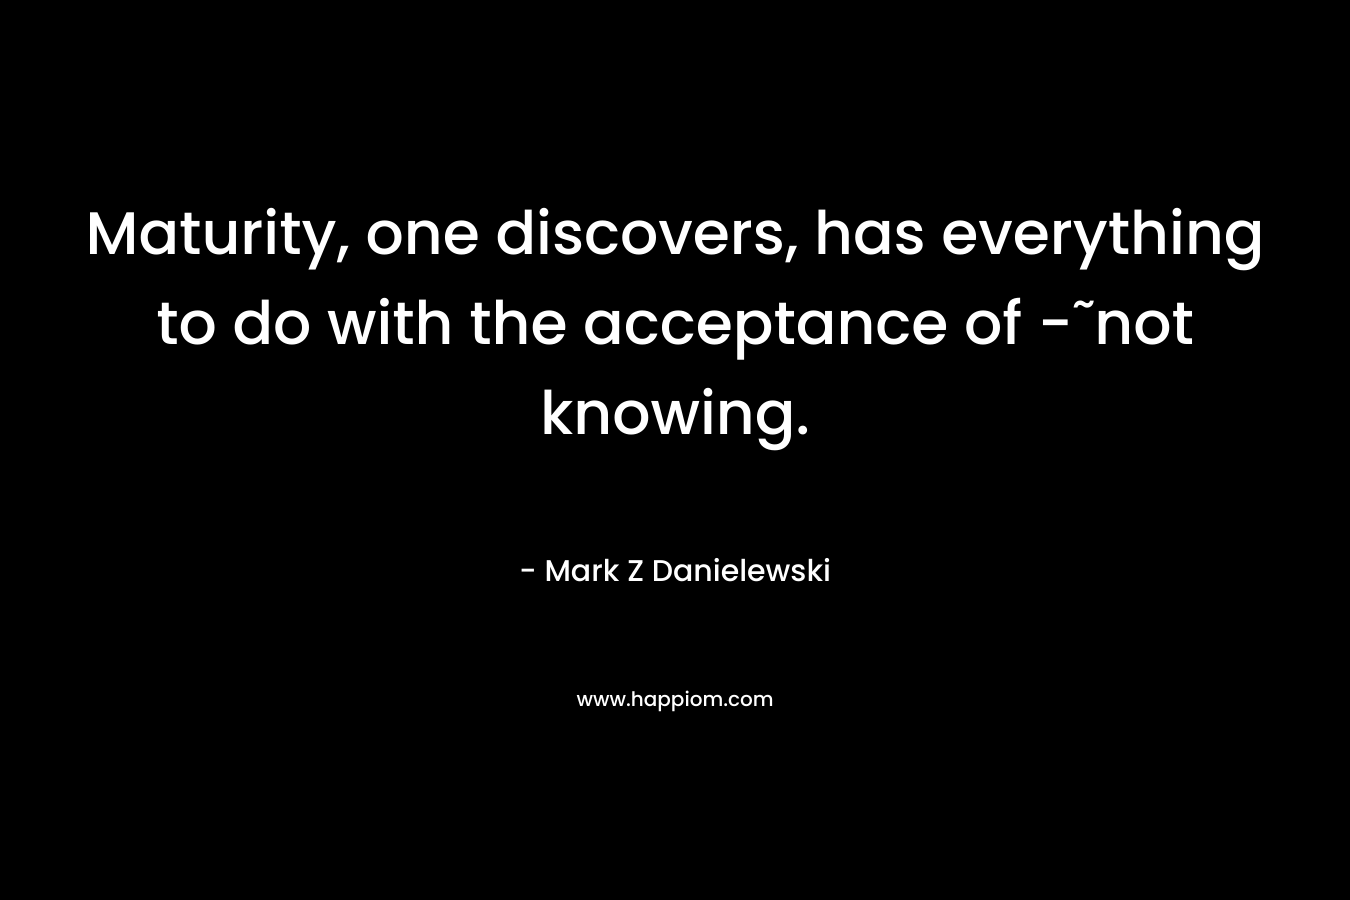 Maturity, one discovers, has everything to do with the acceptance of -˜not knowing.